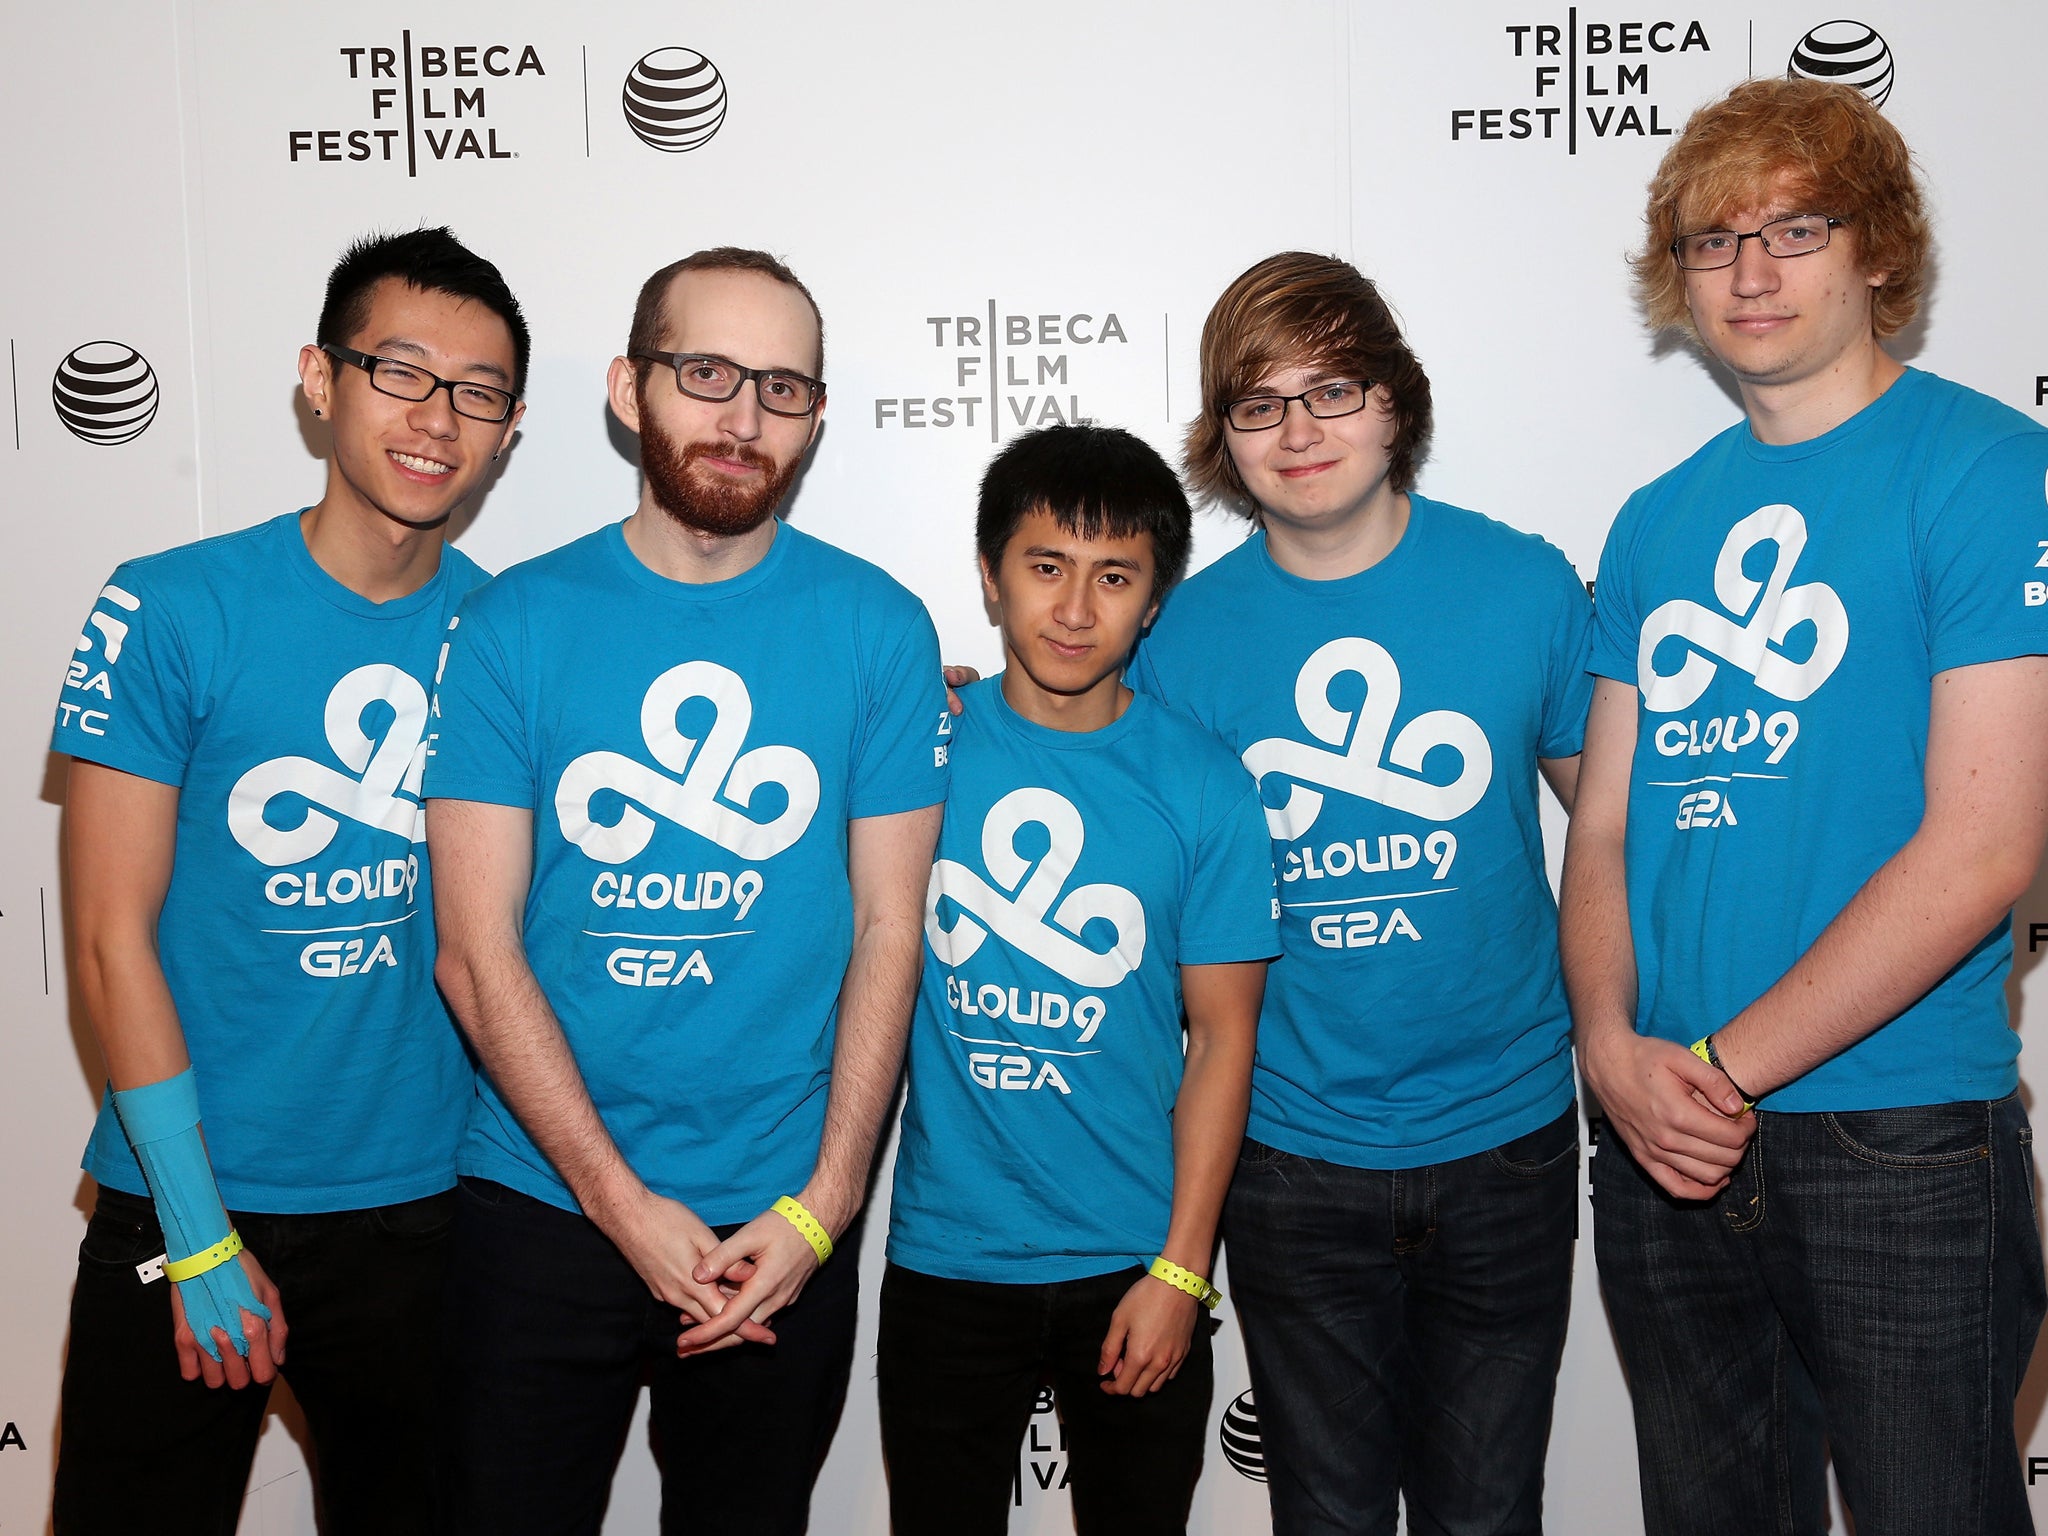 Hai Lam, seen on the far left, with the rest of gaming team Cloud9